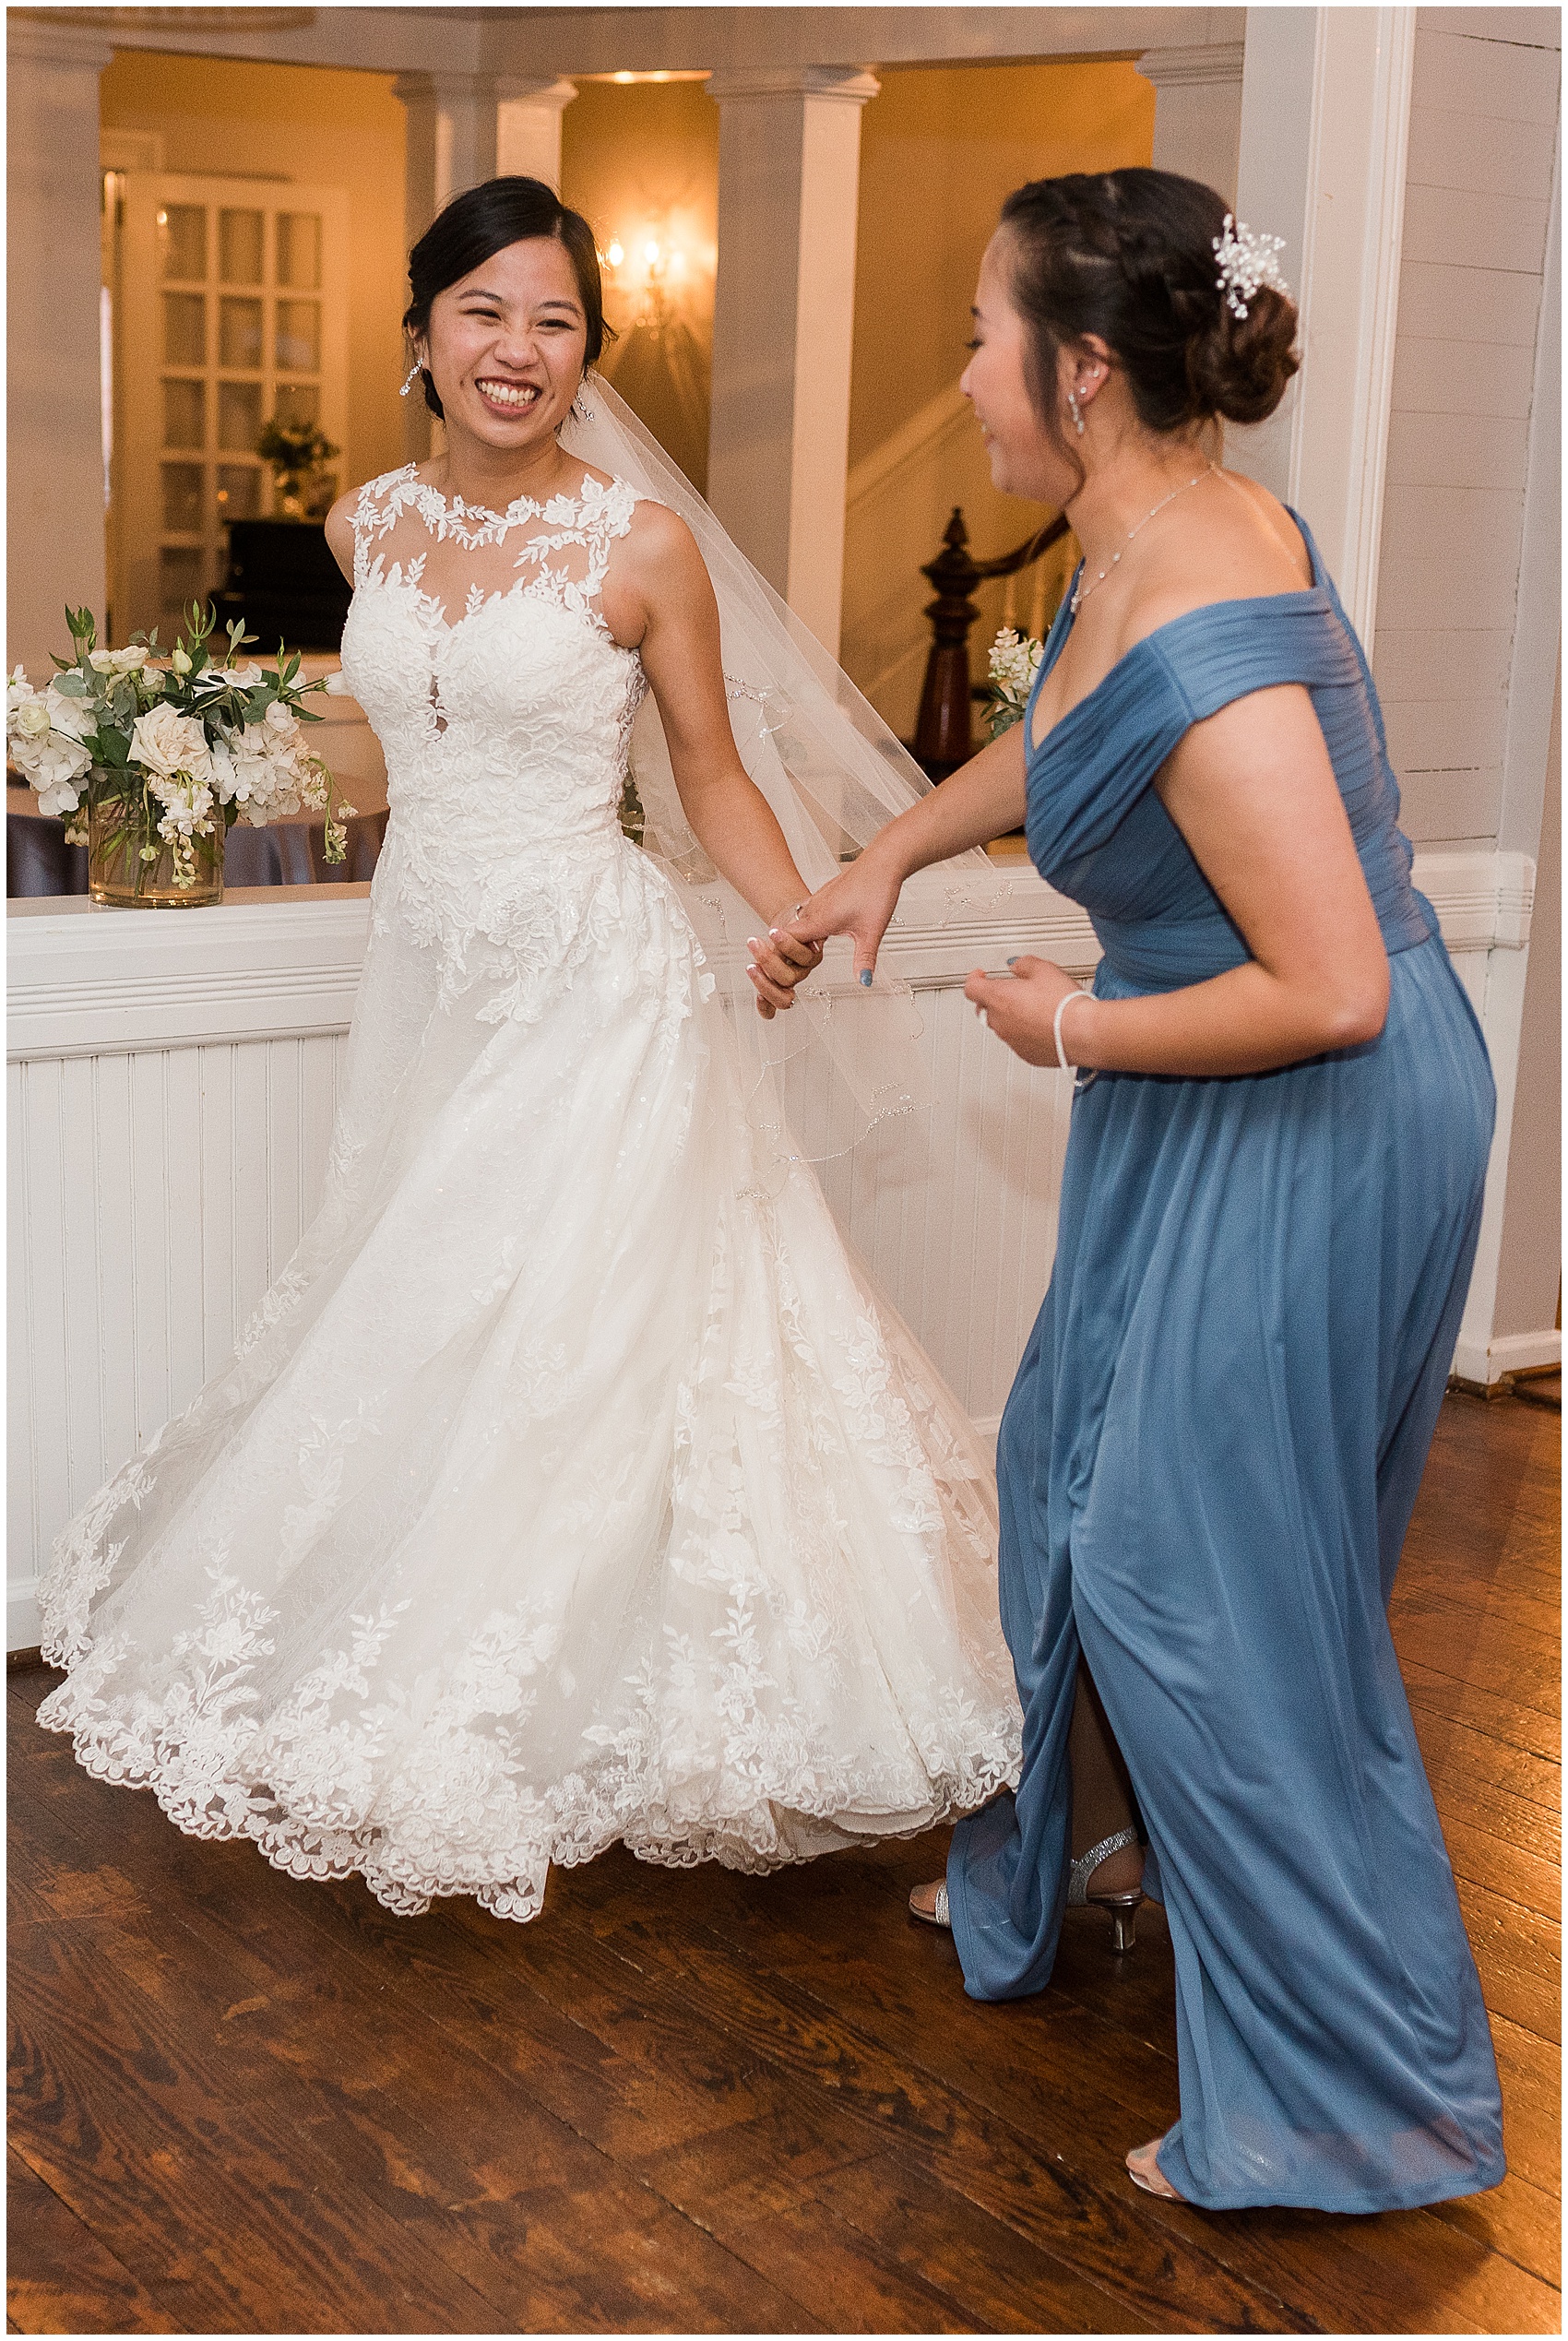 bride dancing with her bridesmaid at her reception